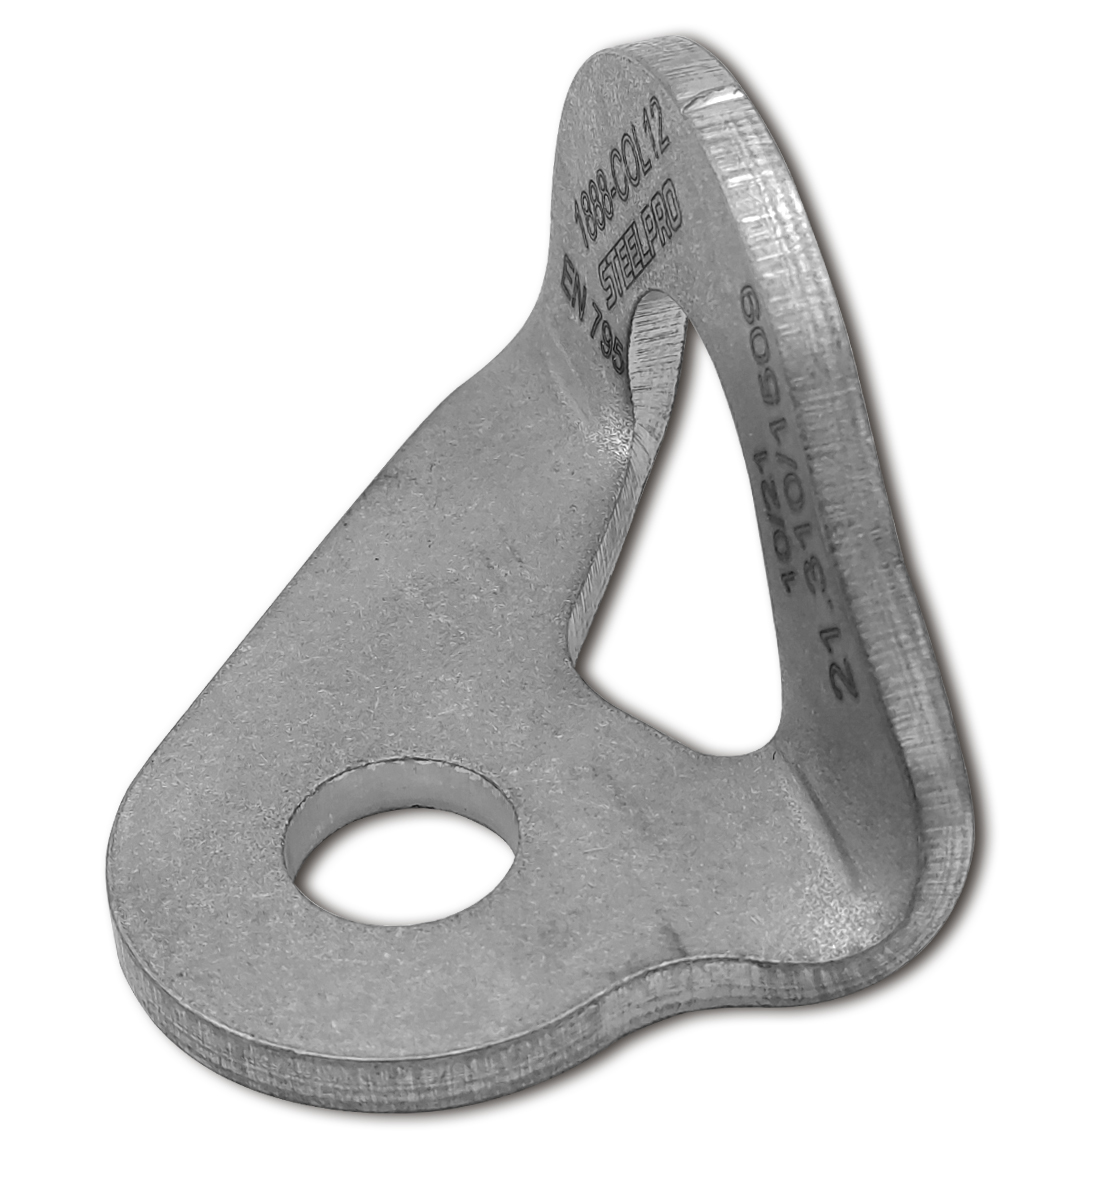 1888-COL12 Height Protection Anchor plates and fixtures Anchoring device for stainless steel harness.